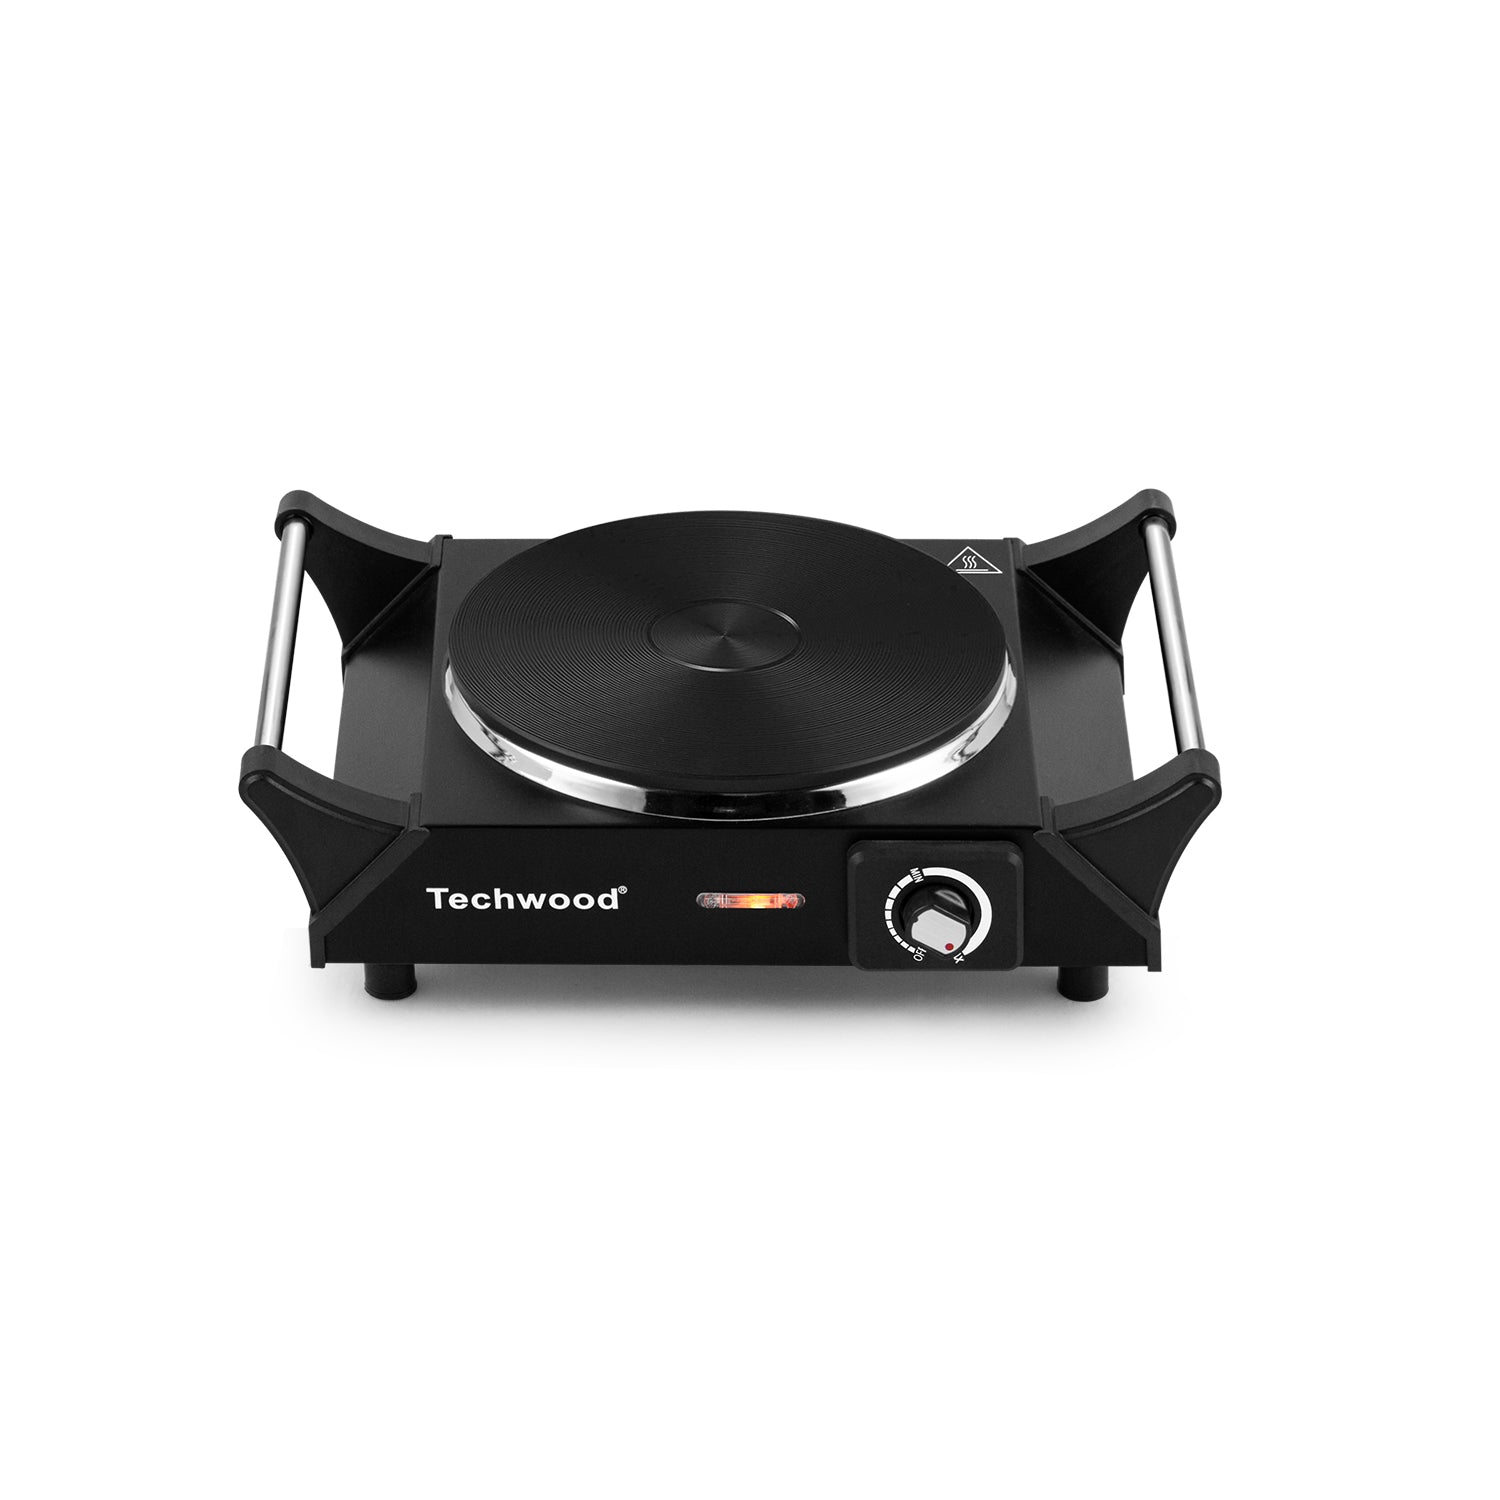 1500W Hot Plate, Countertop Cast Iron Single Burner for Cooking